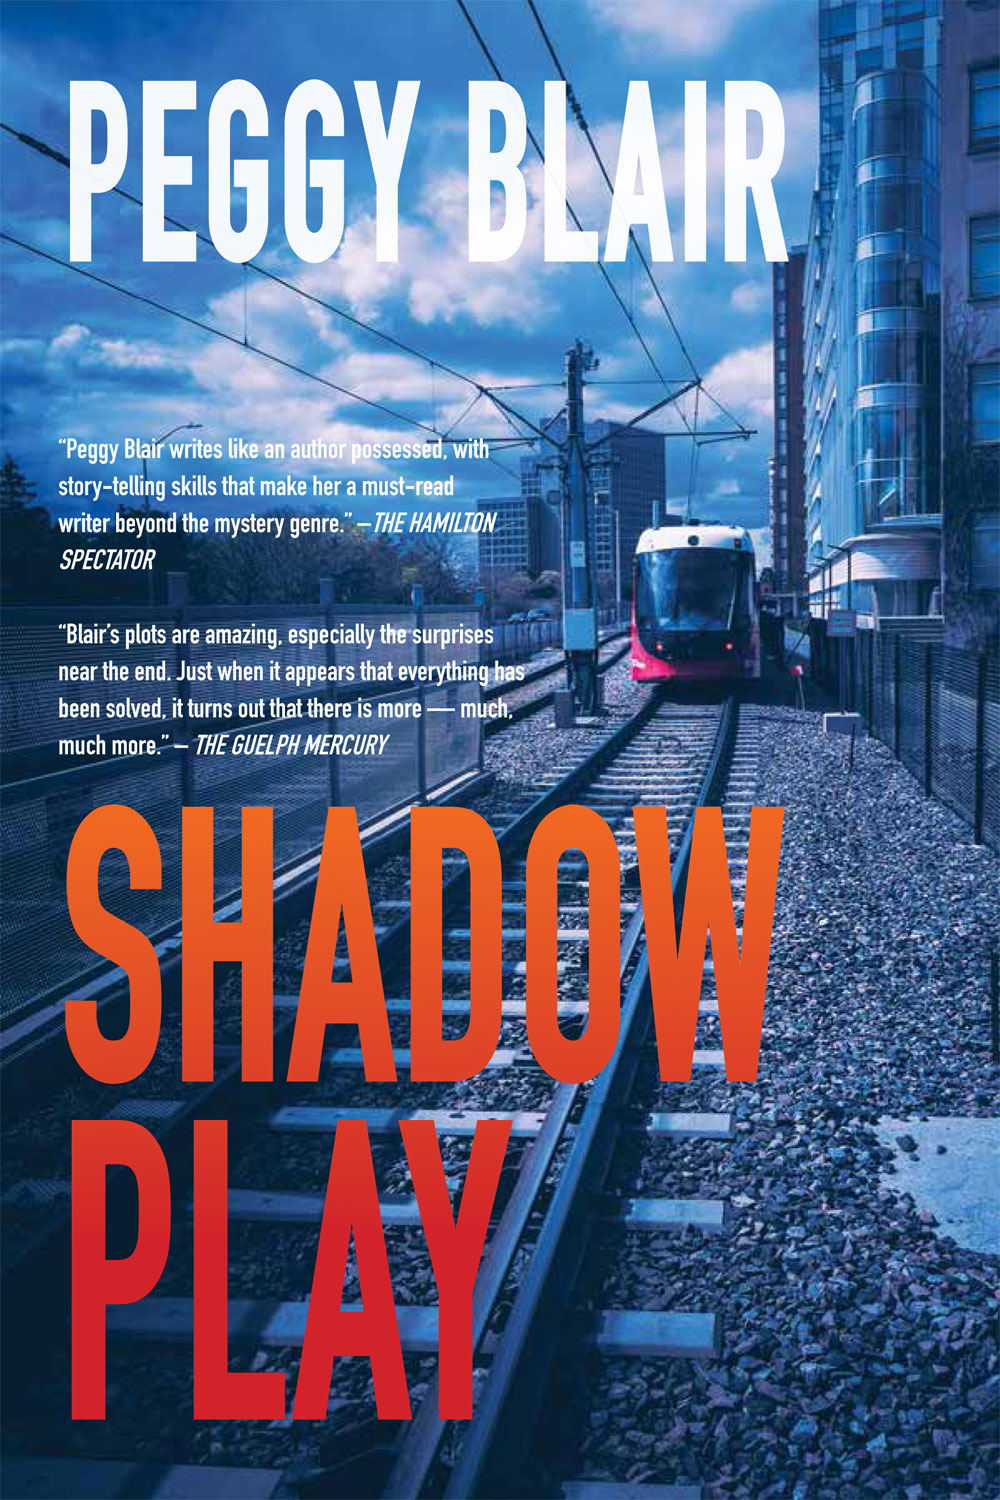 Cover of Shadow Play book depicting light rail train on tracks in an urban environment.